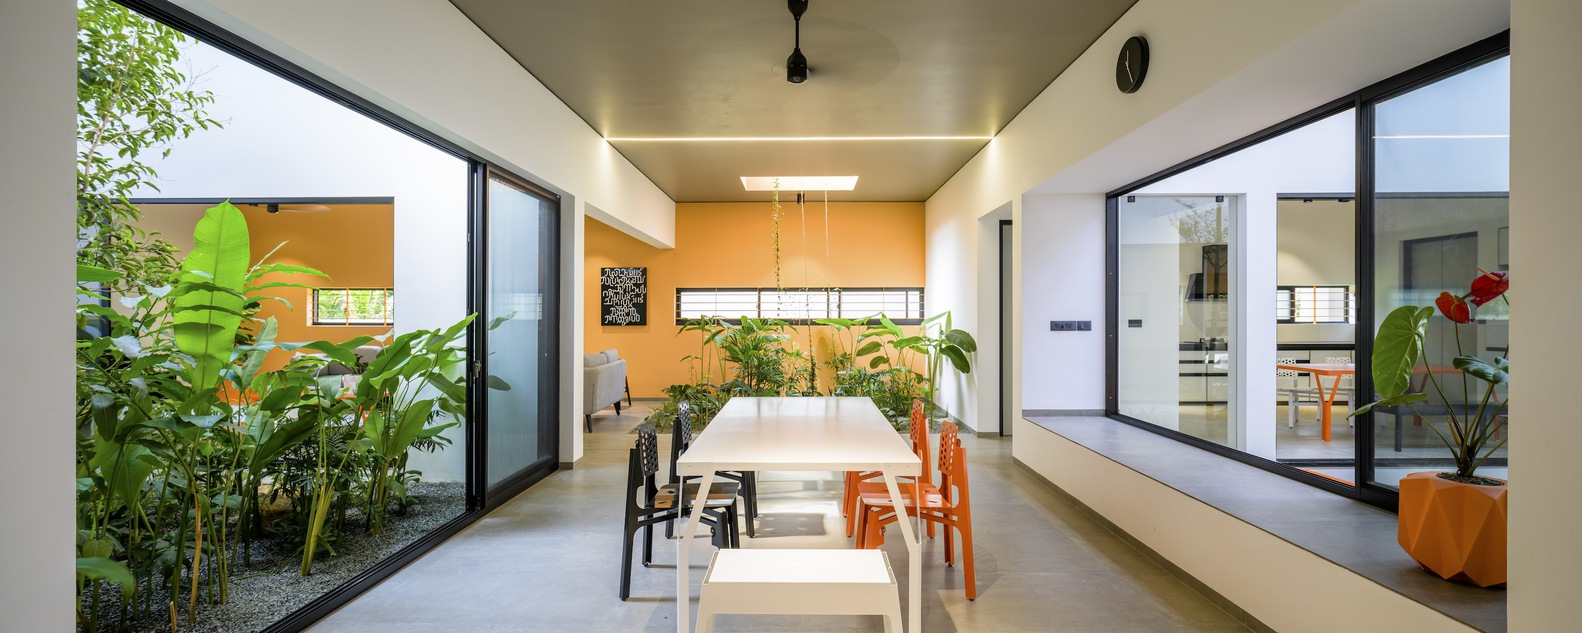 The Colorburst House's open floor plan is one that embraces harmony with nature's seasons. Image by Praveen Mohandas